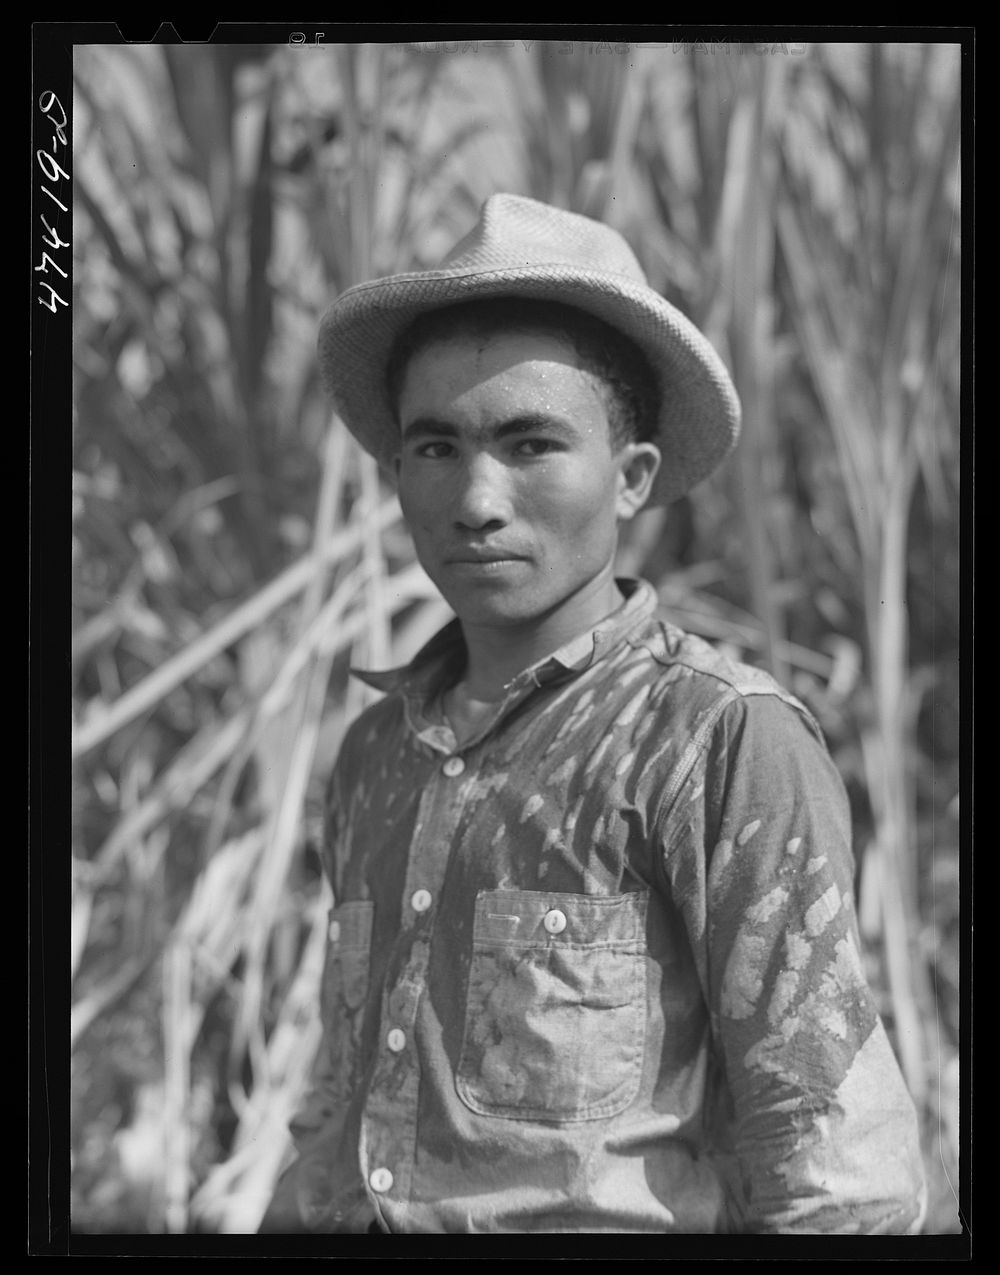 Guanica, Puerto Rico (vicinity). Farm laborer who was cutting sugar cane in a field. Sourced from the Library of Congress.